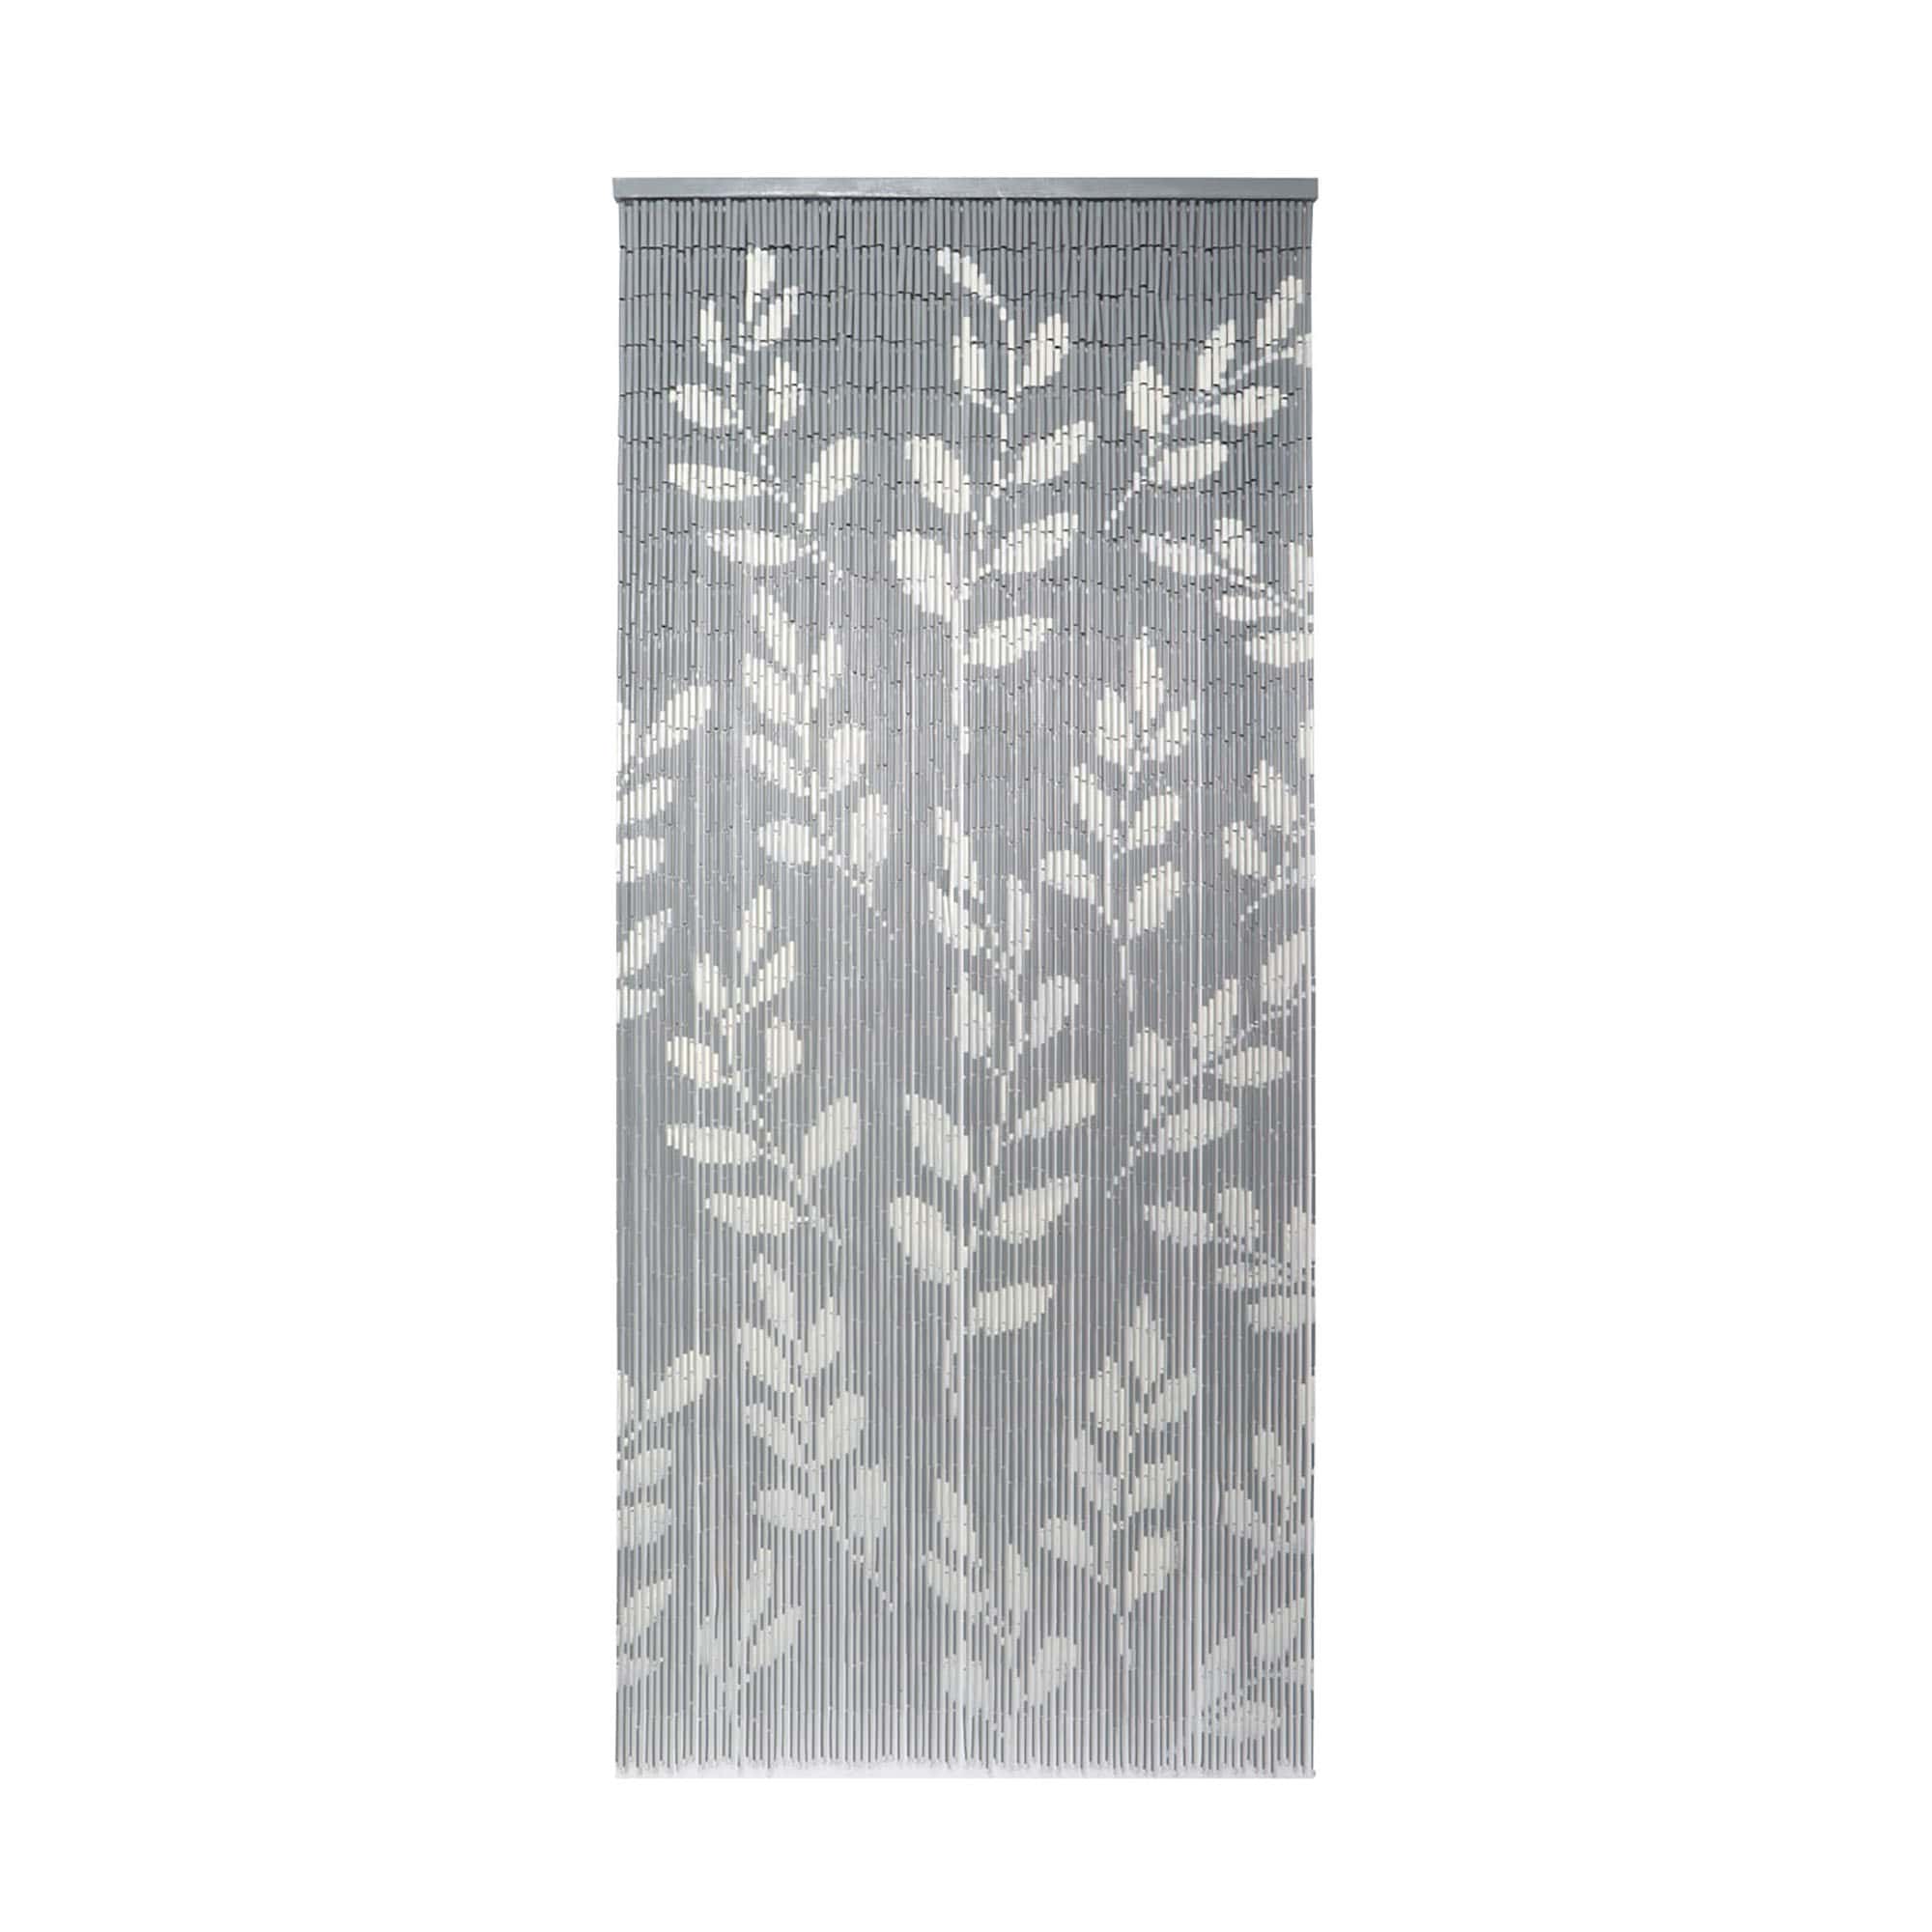 picture of a decorative bamboo door curtain with foliage design in white and gray colors